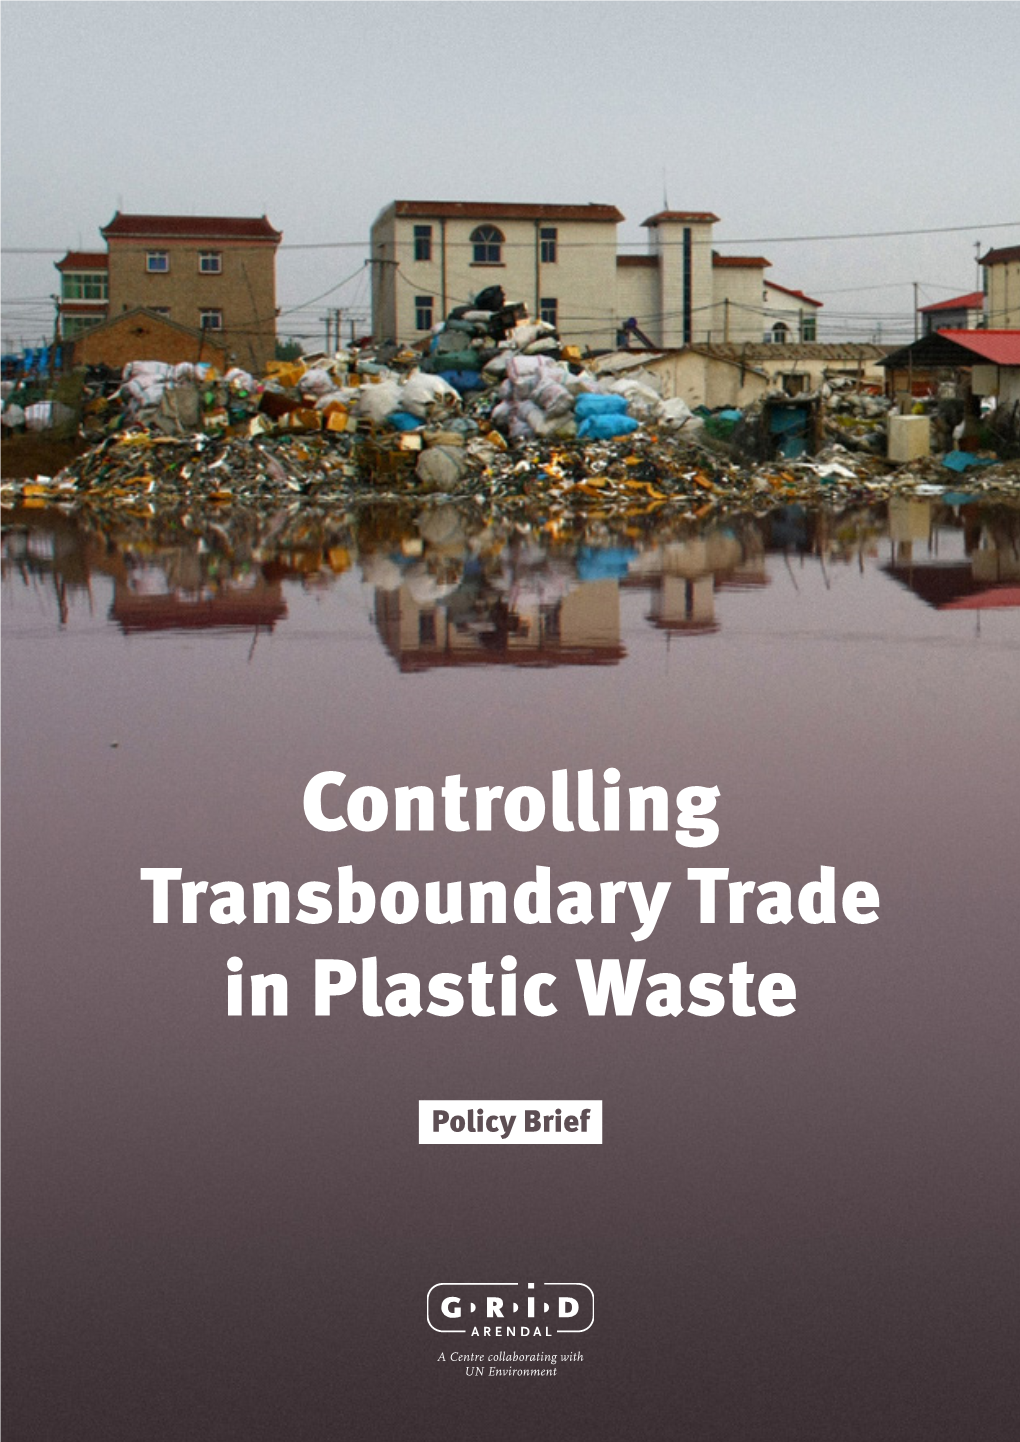 Controlling Transboundary Trade in Plastic Waste